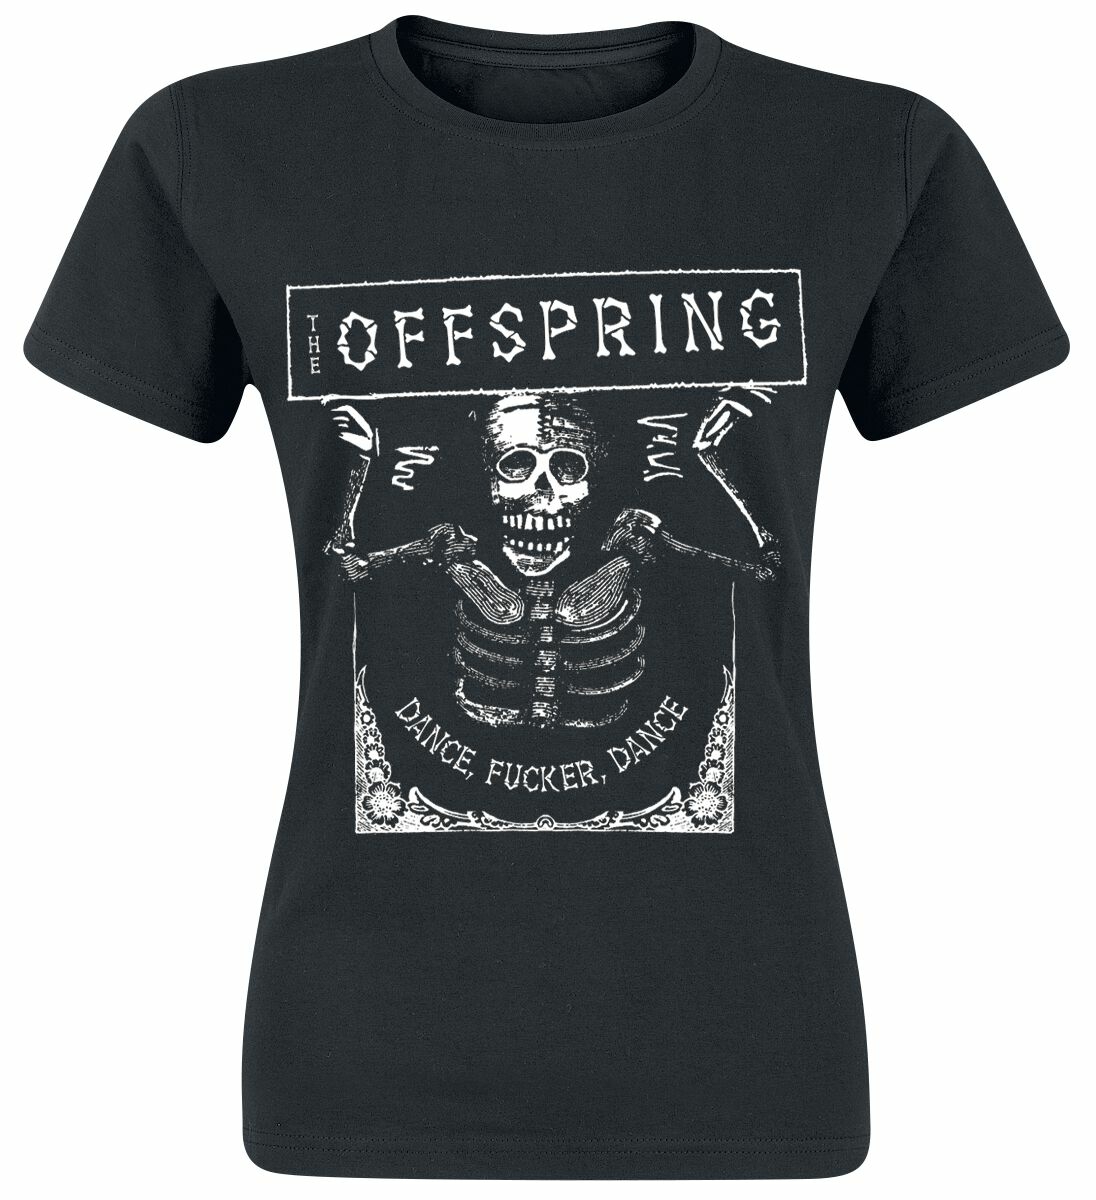 Offspring, The